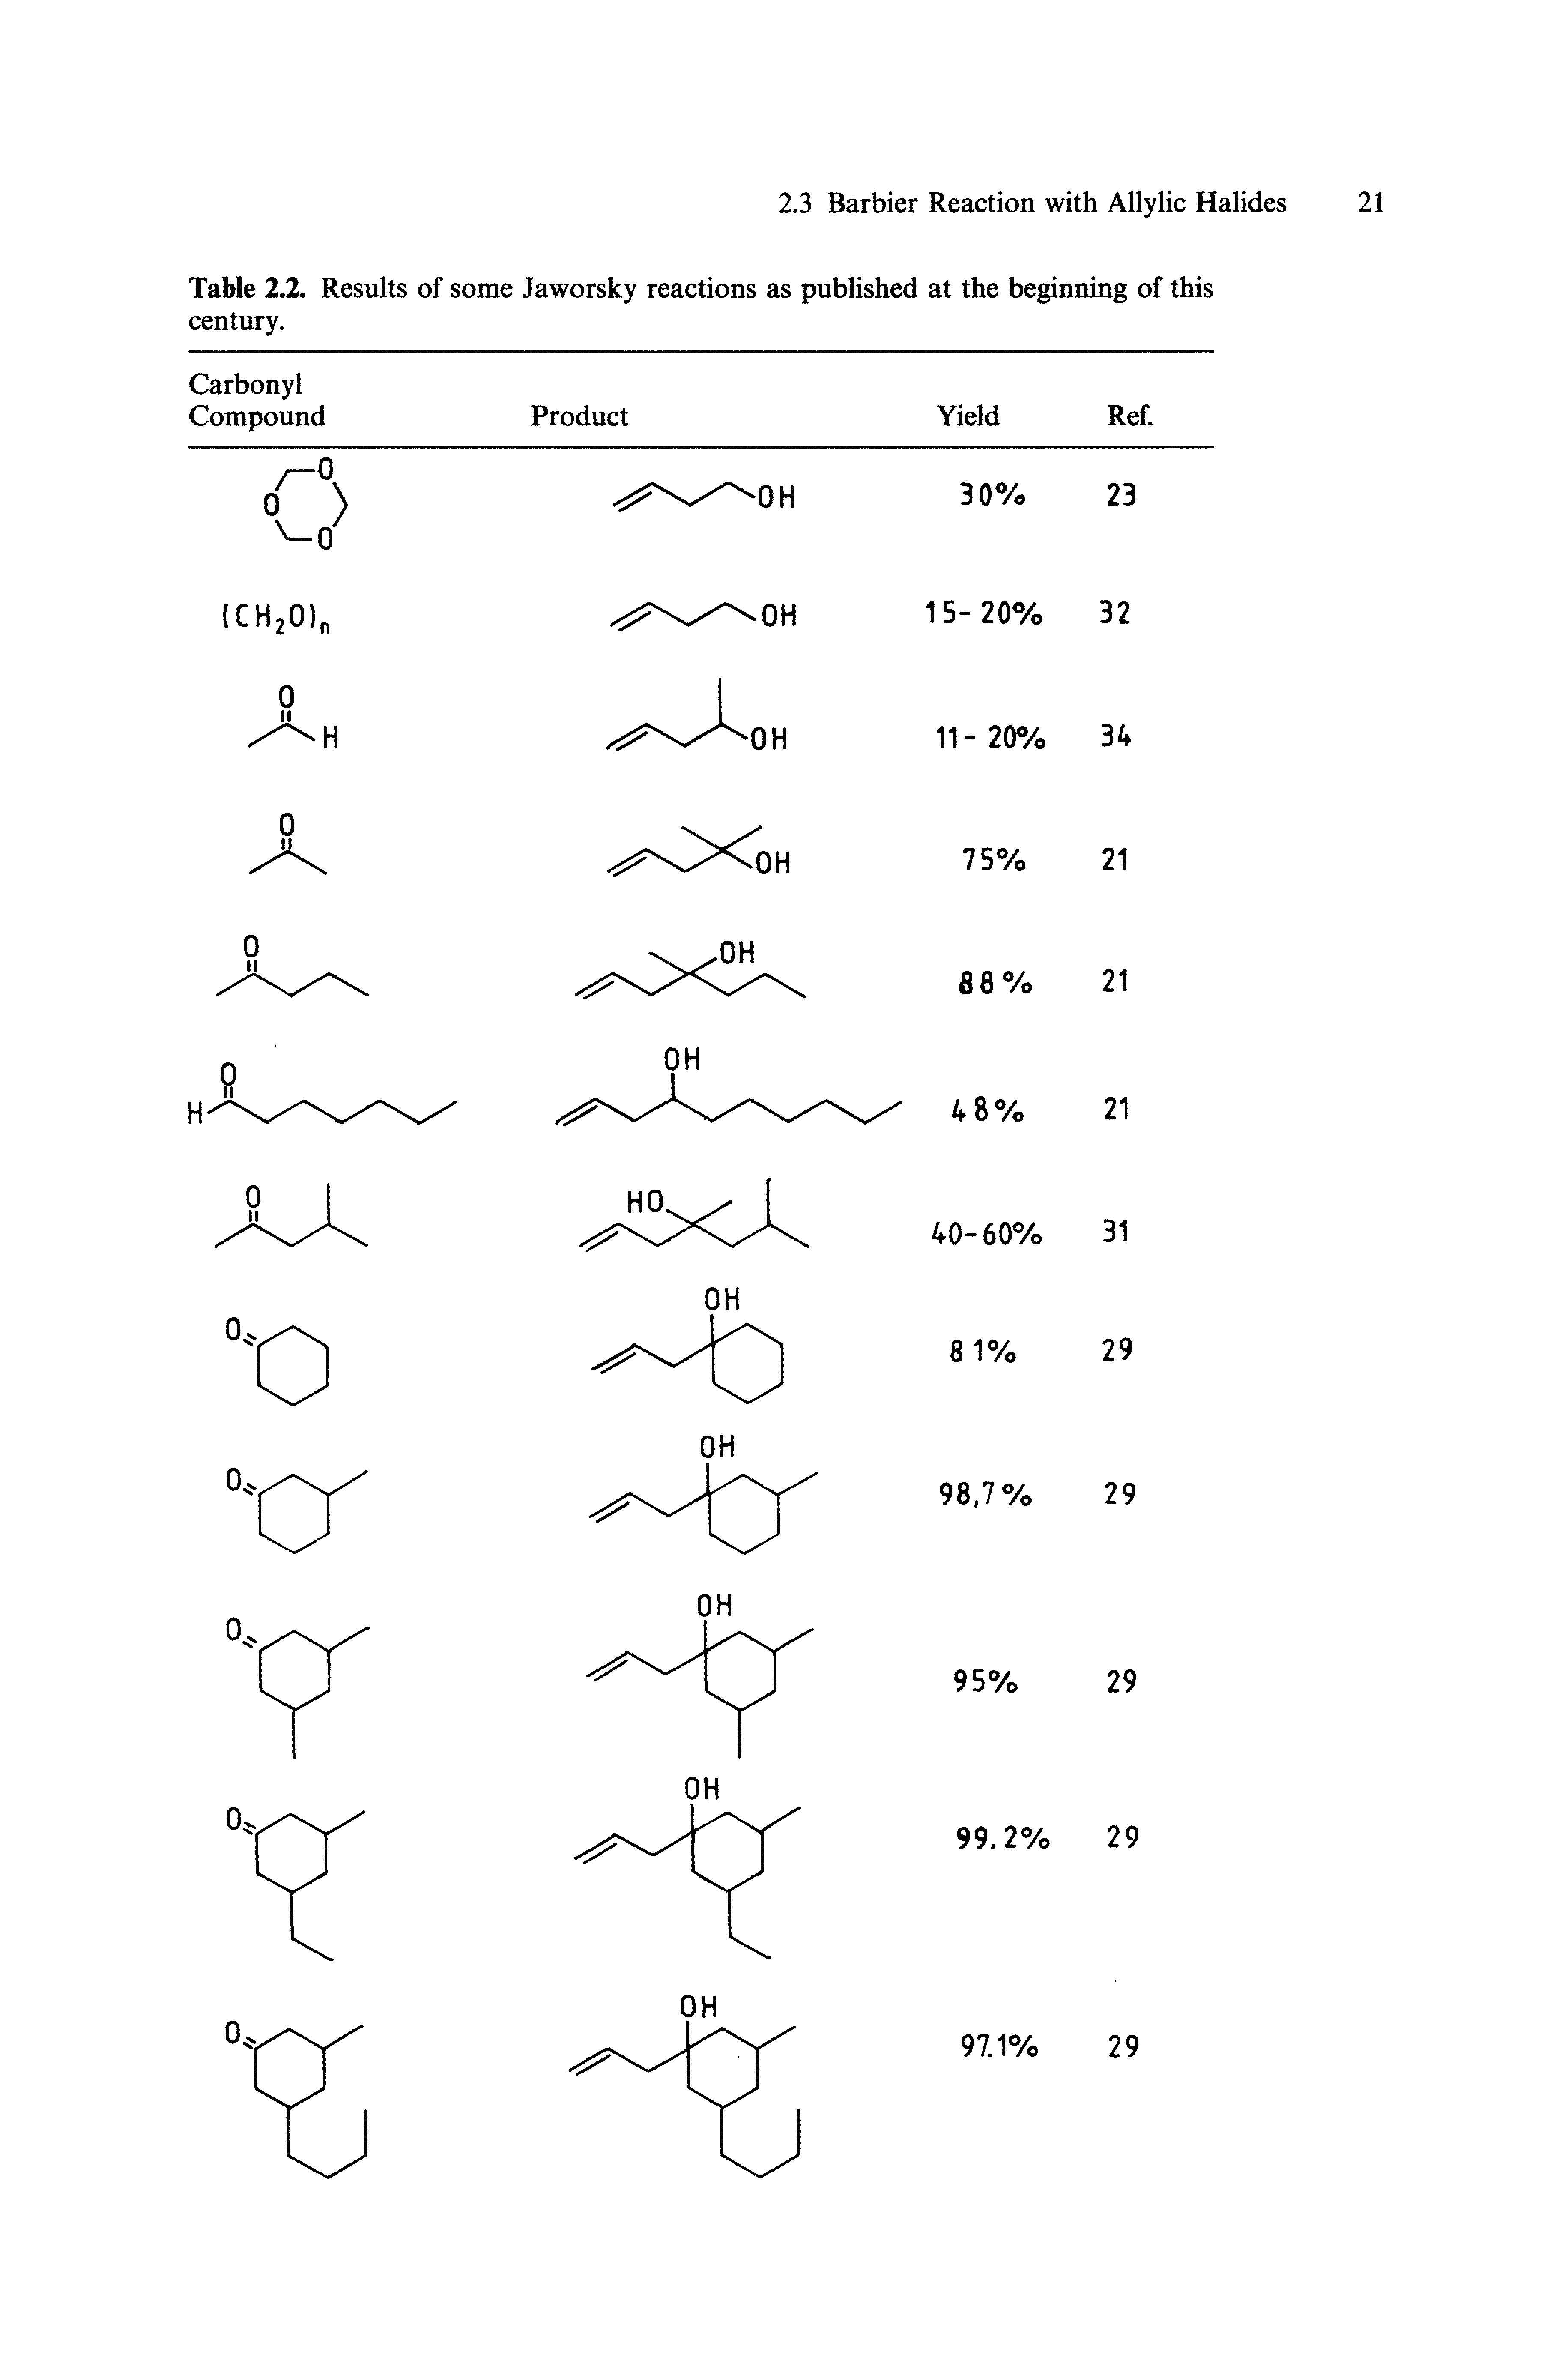 Table 2.2. Results of some Jaworsky reactions as published at the beginning of this century.